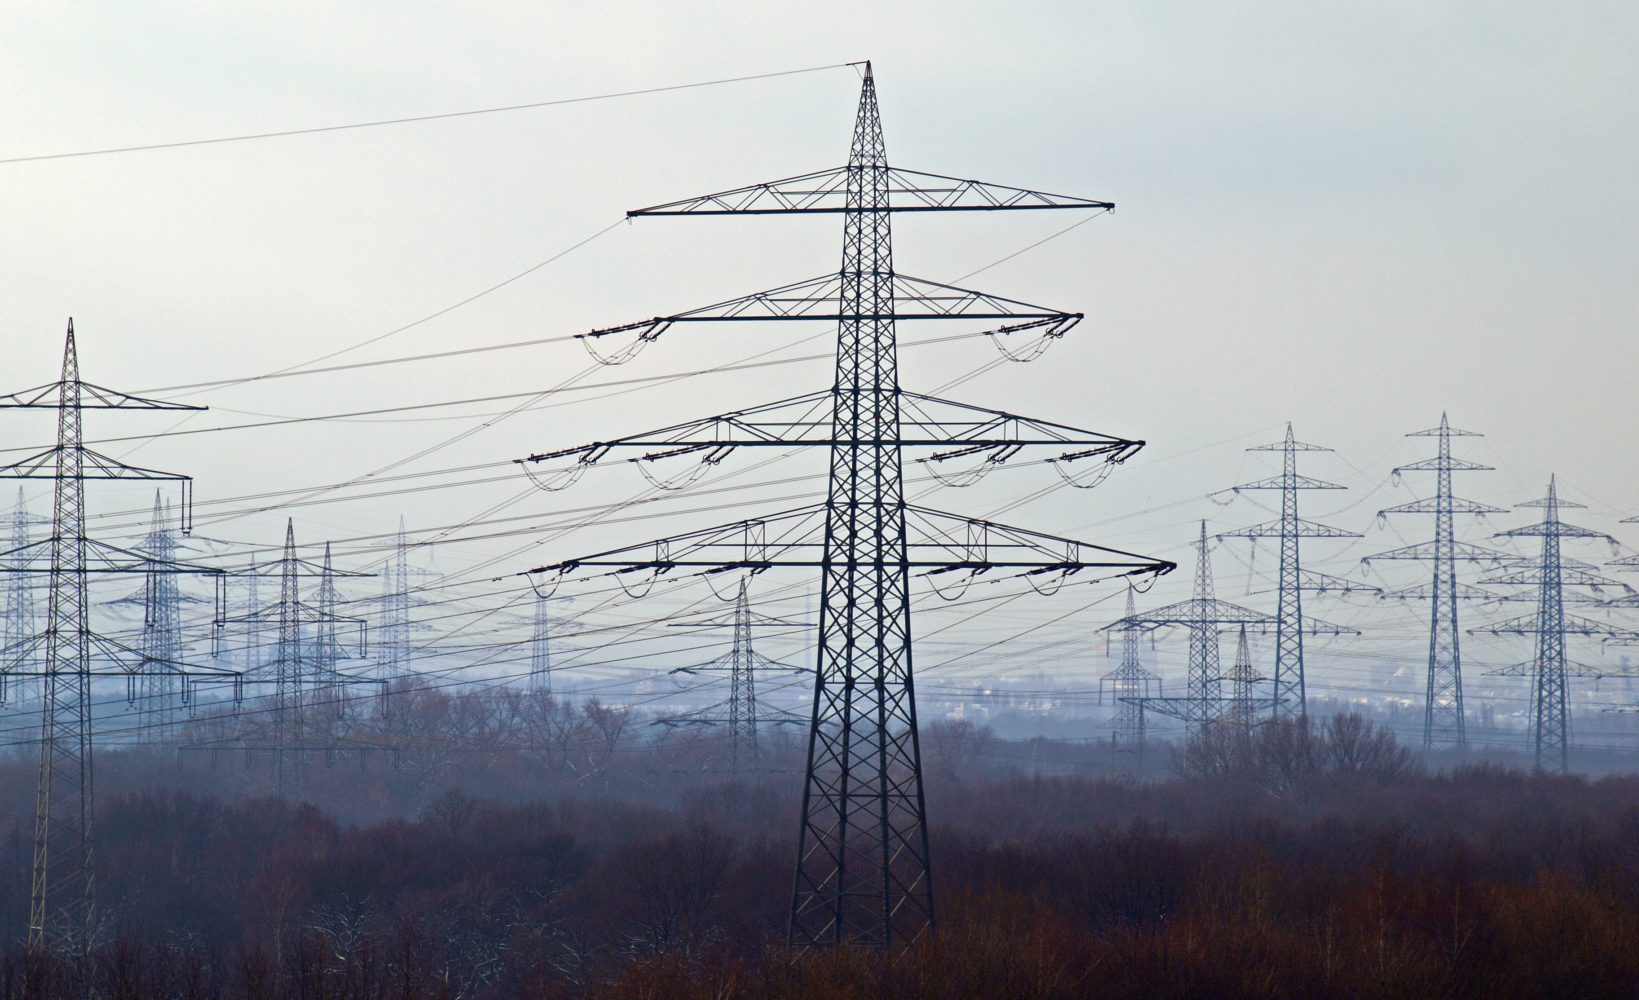 MRP Reiterates its Long Electric Utilities Theme